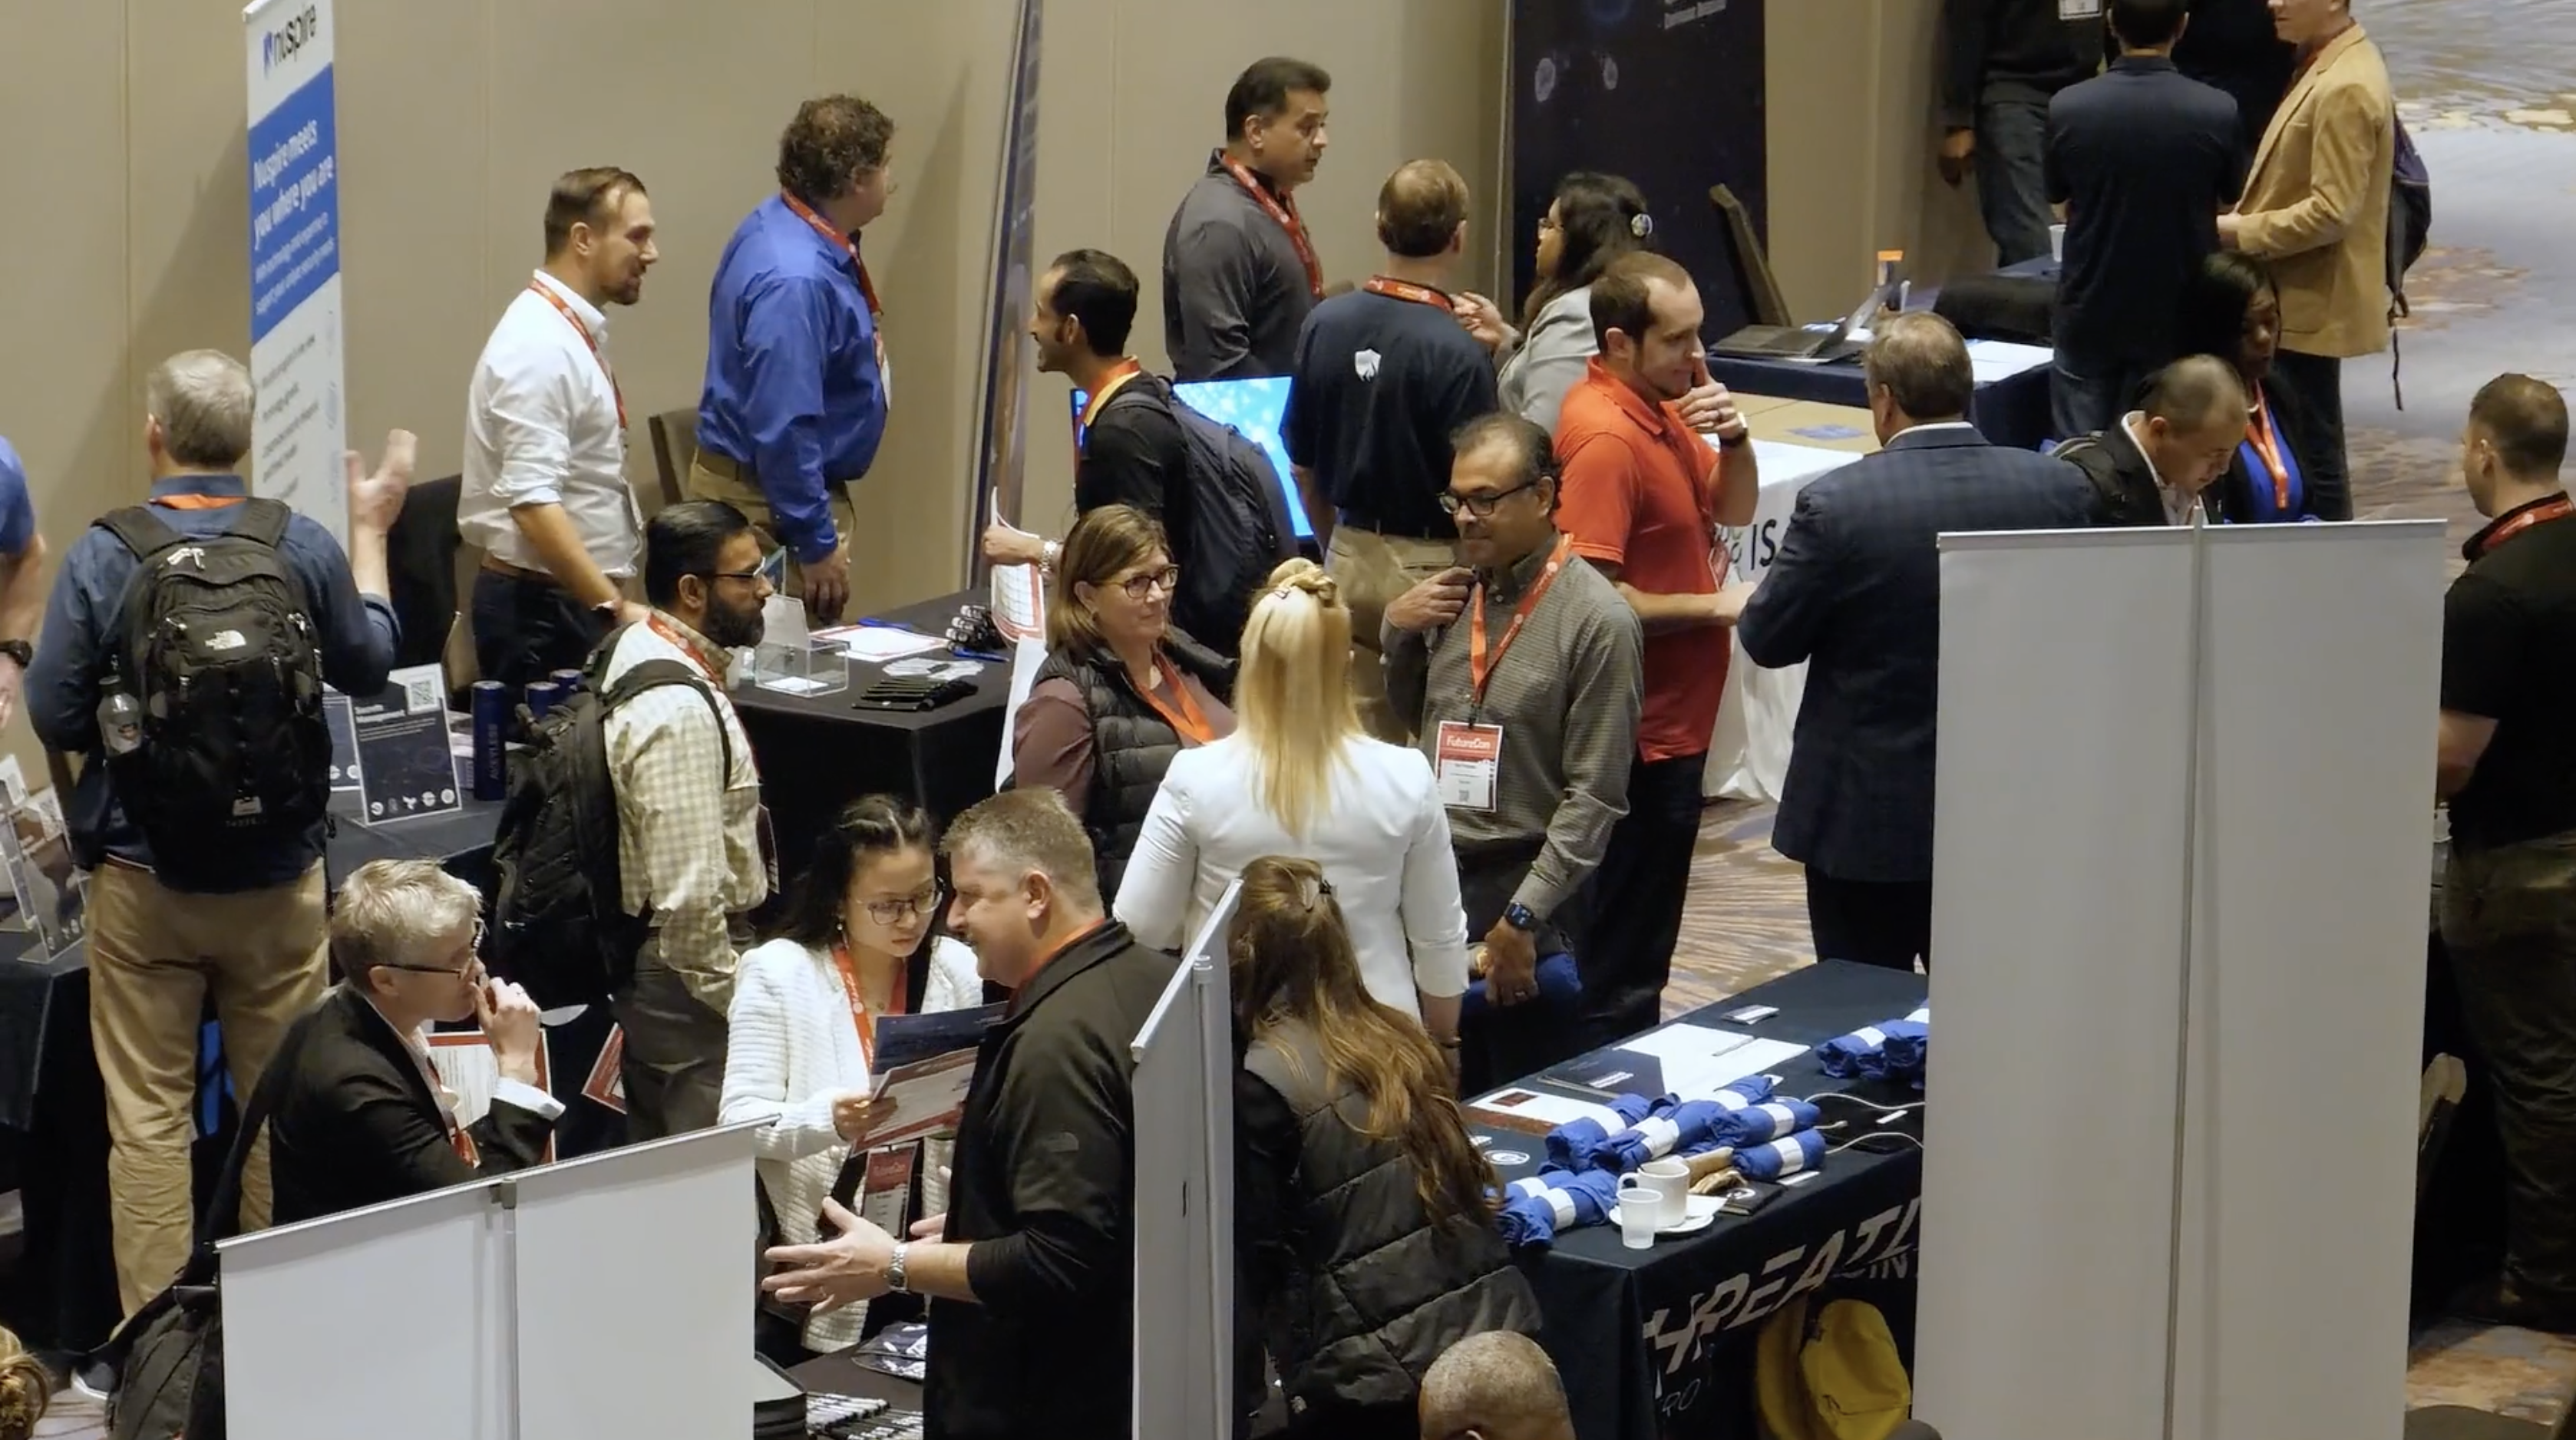 Photo of people mingling at a conference.